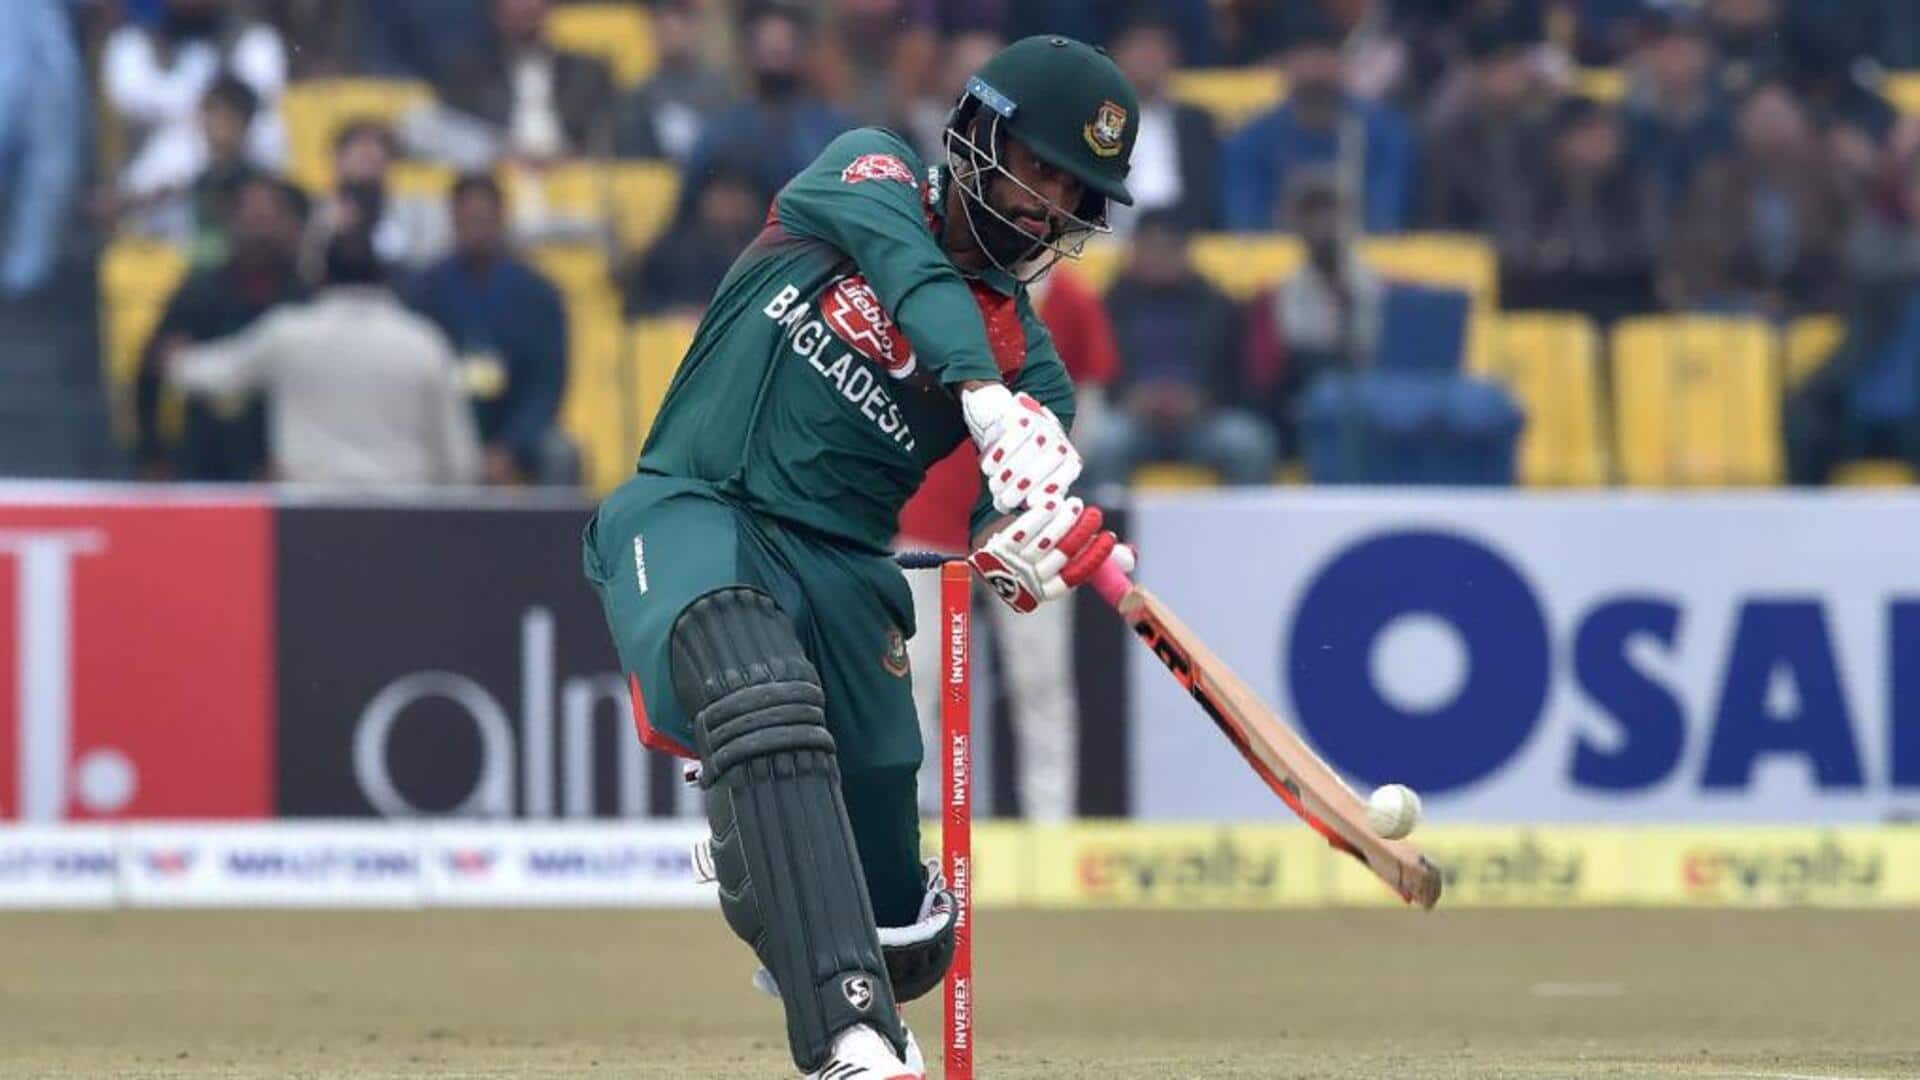 Tamim Iqbal's omission from World Cup squad: All we know